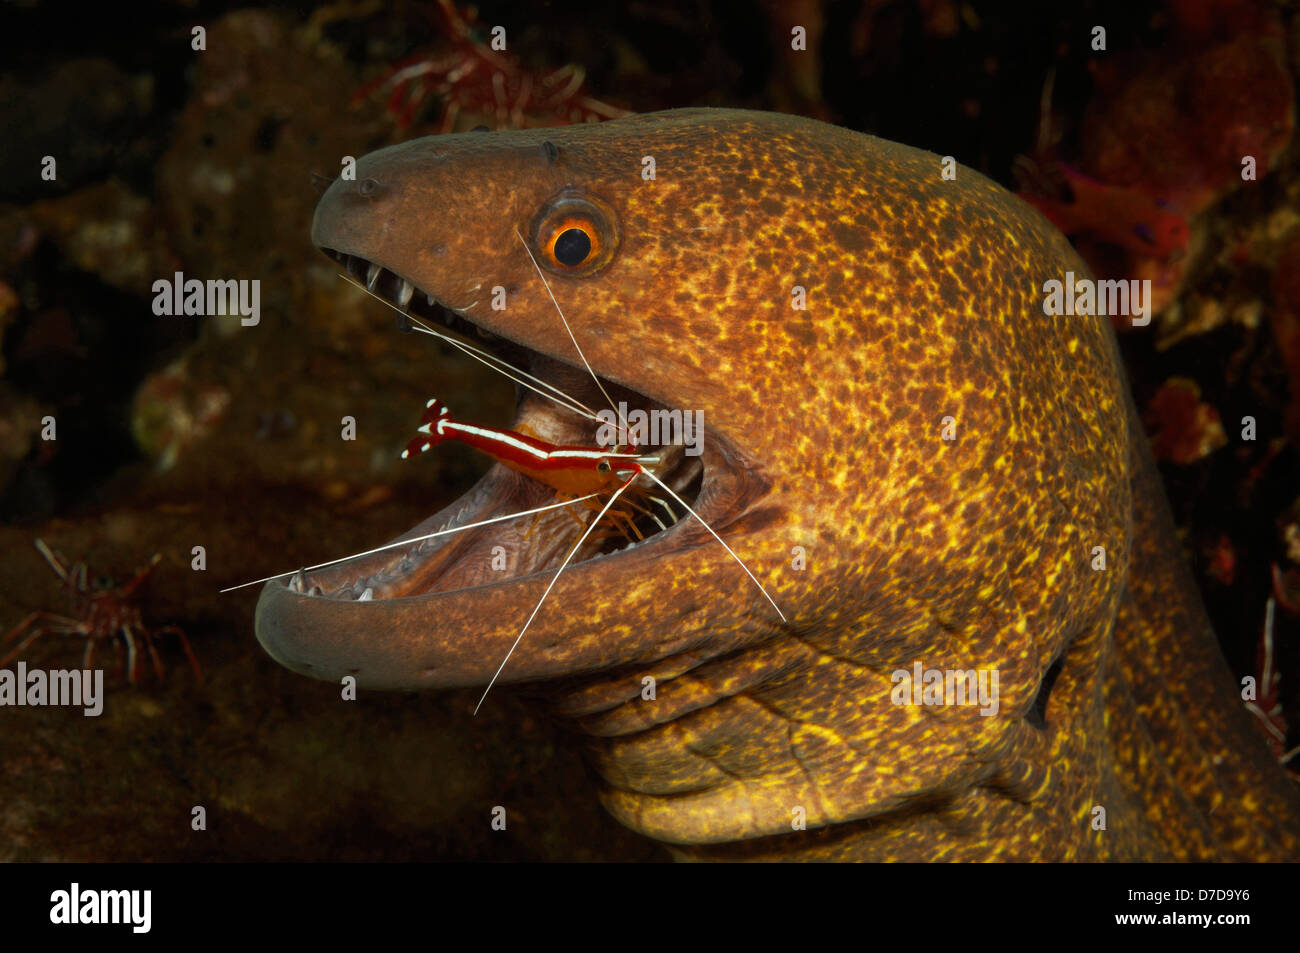 Yellow-edged Moray cleaned by Skunk Cleaner Shrimp, Cephalopholis leopardus, Lysmata amboniensis, Bali, Indonesia Stock Photo